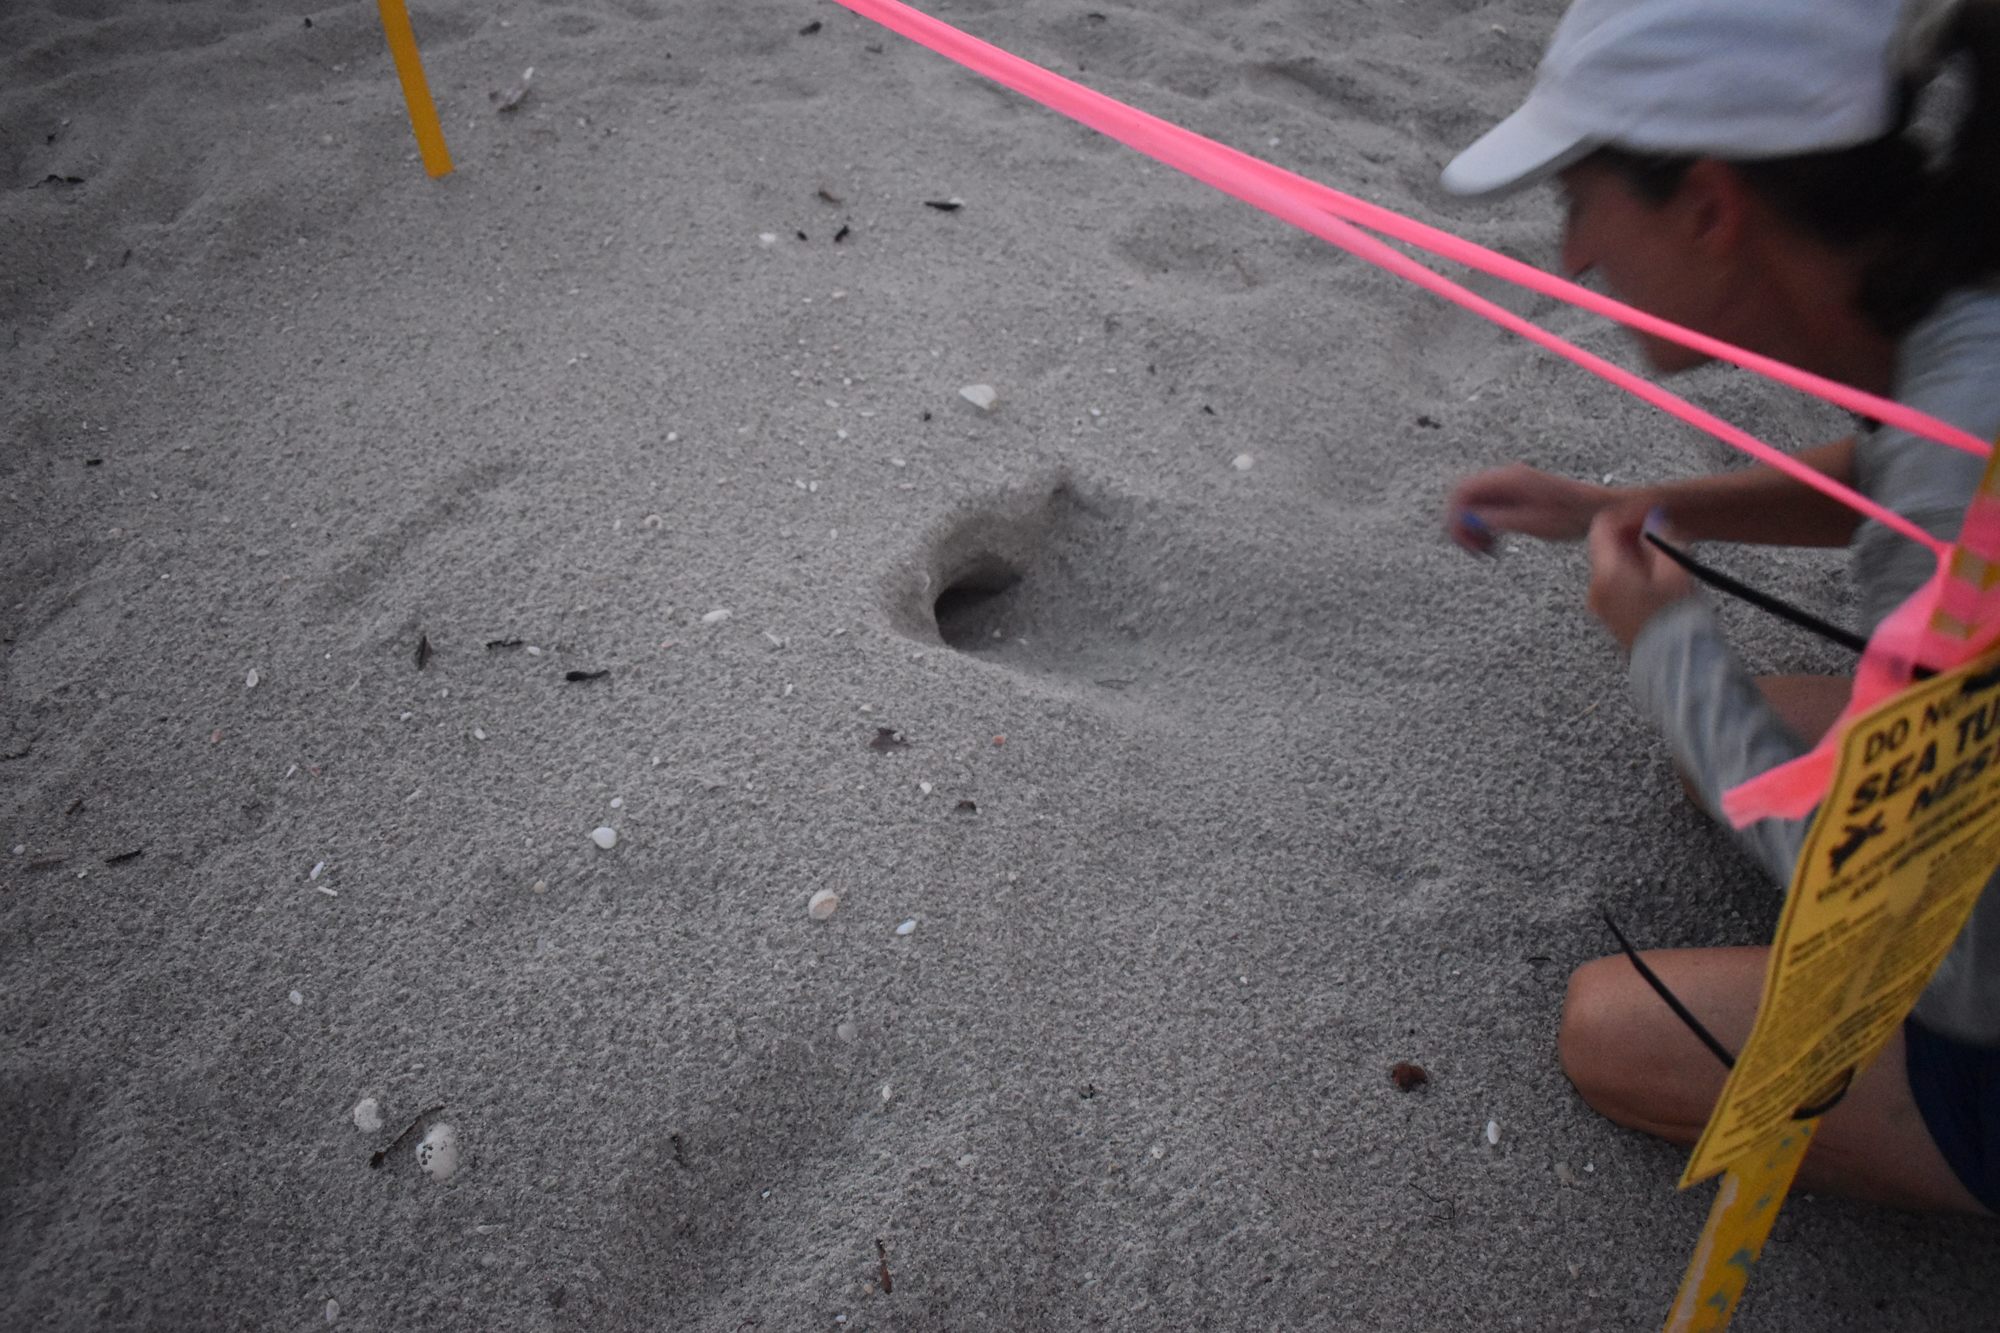 Cyndi Seamon inspects whether turtles hatched or something got into the nest.